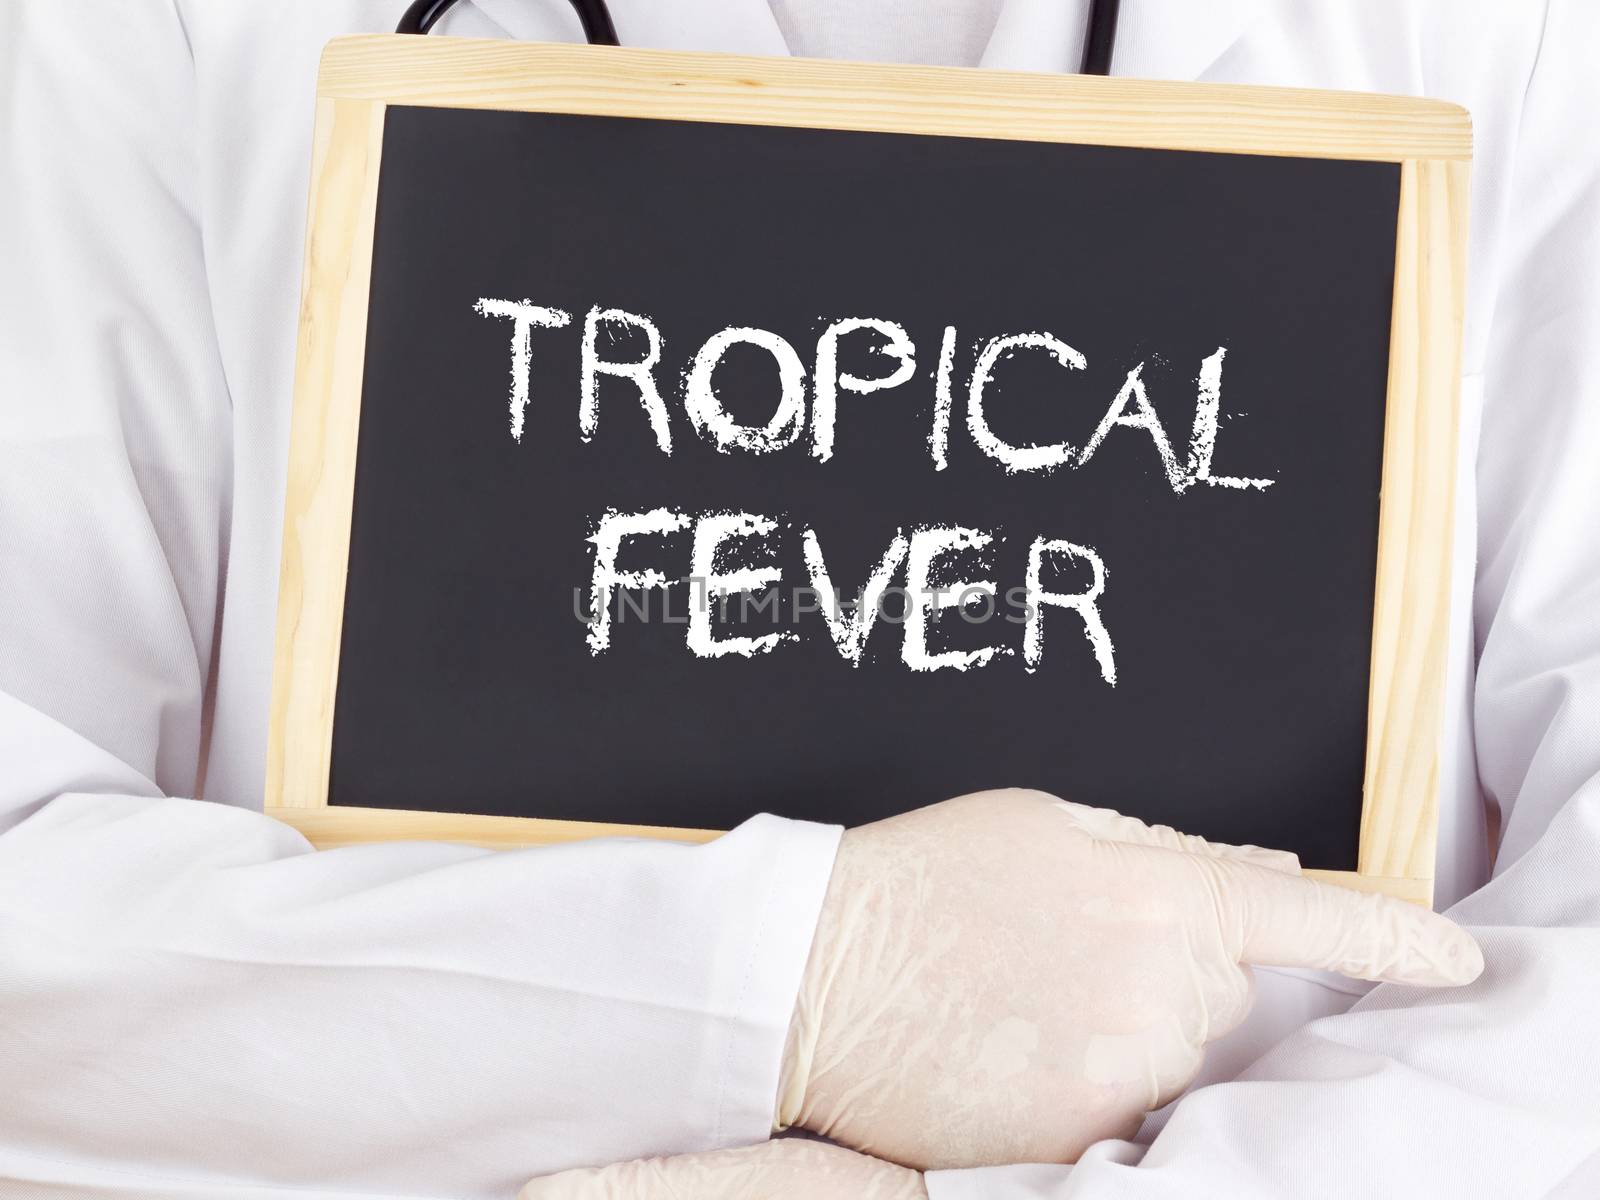 Doctor shows information on blackboard: Tropical fever by gwolters